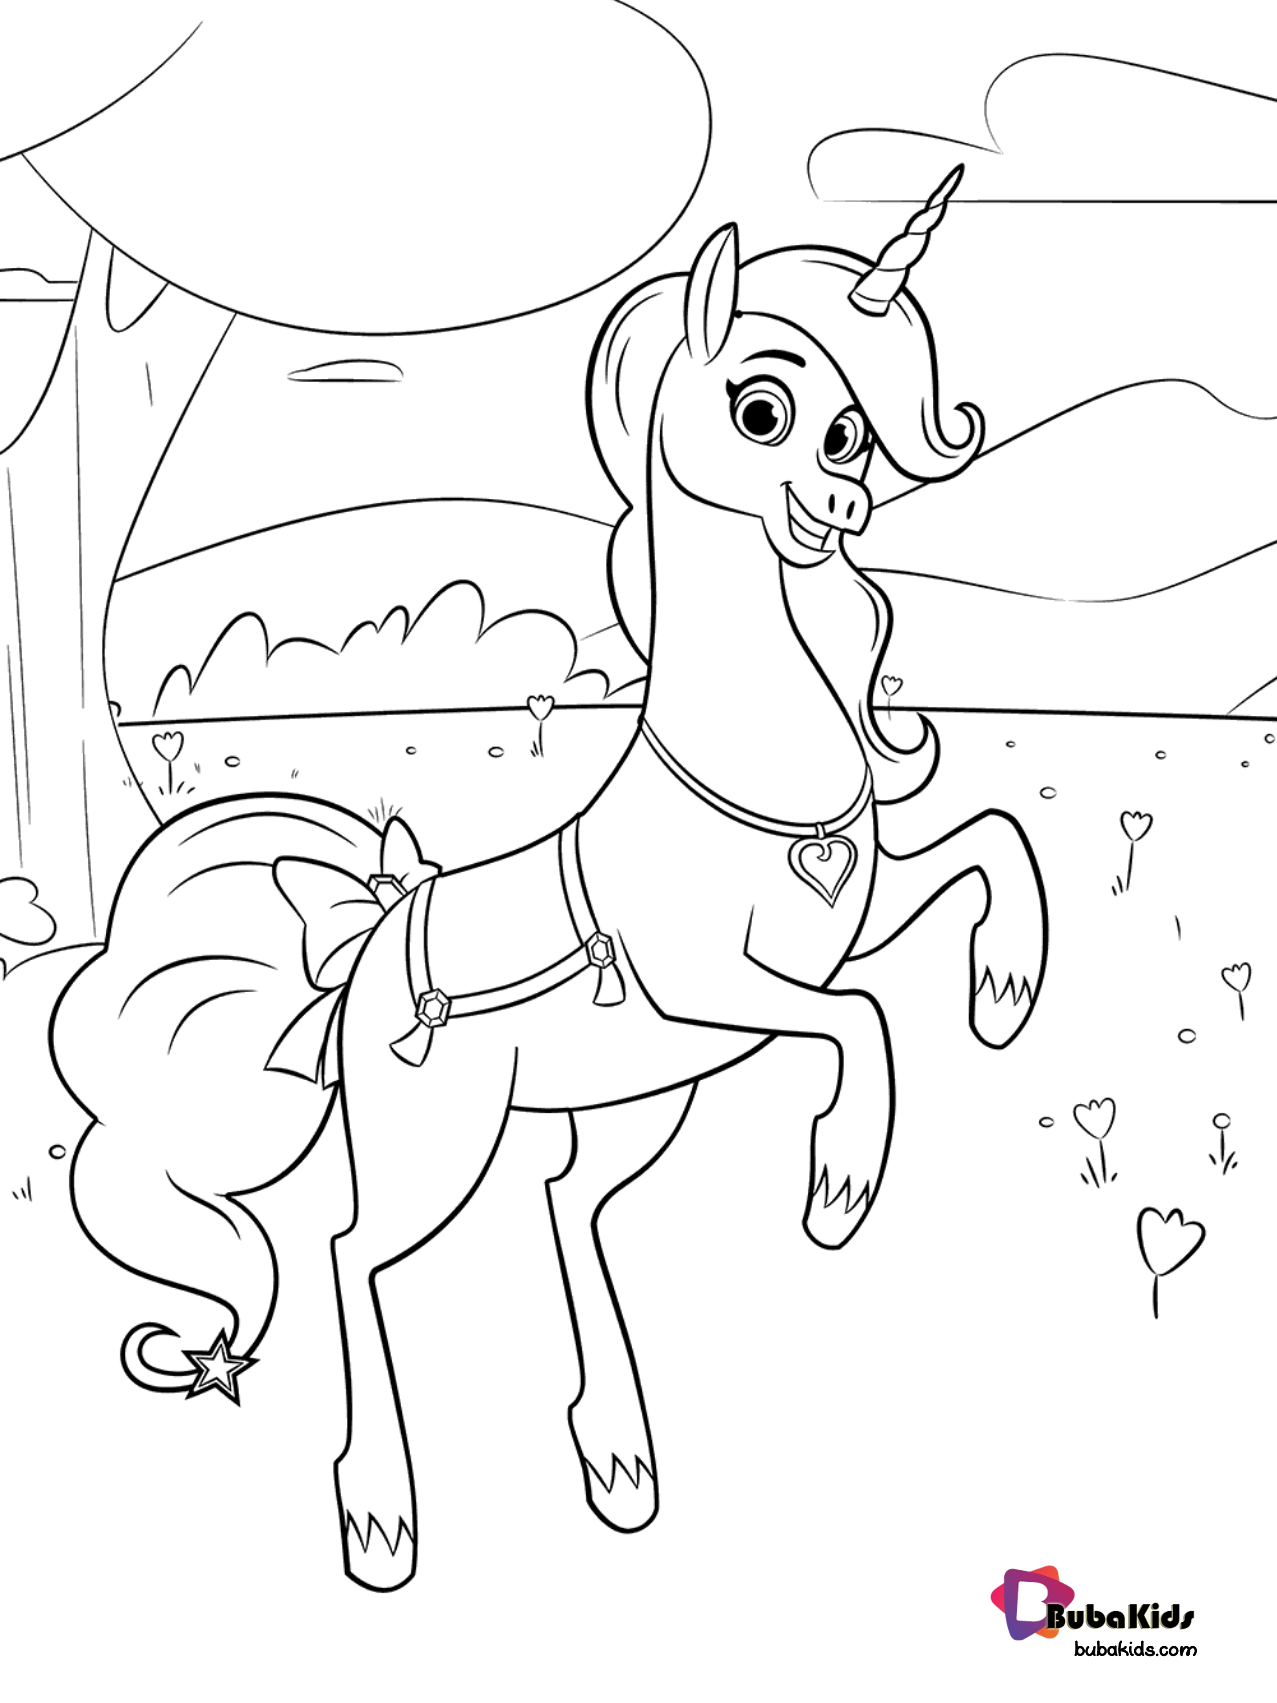 Free download Cute Unicorn Coloring Page. Wallpaper